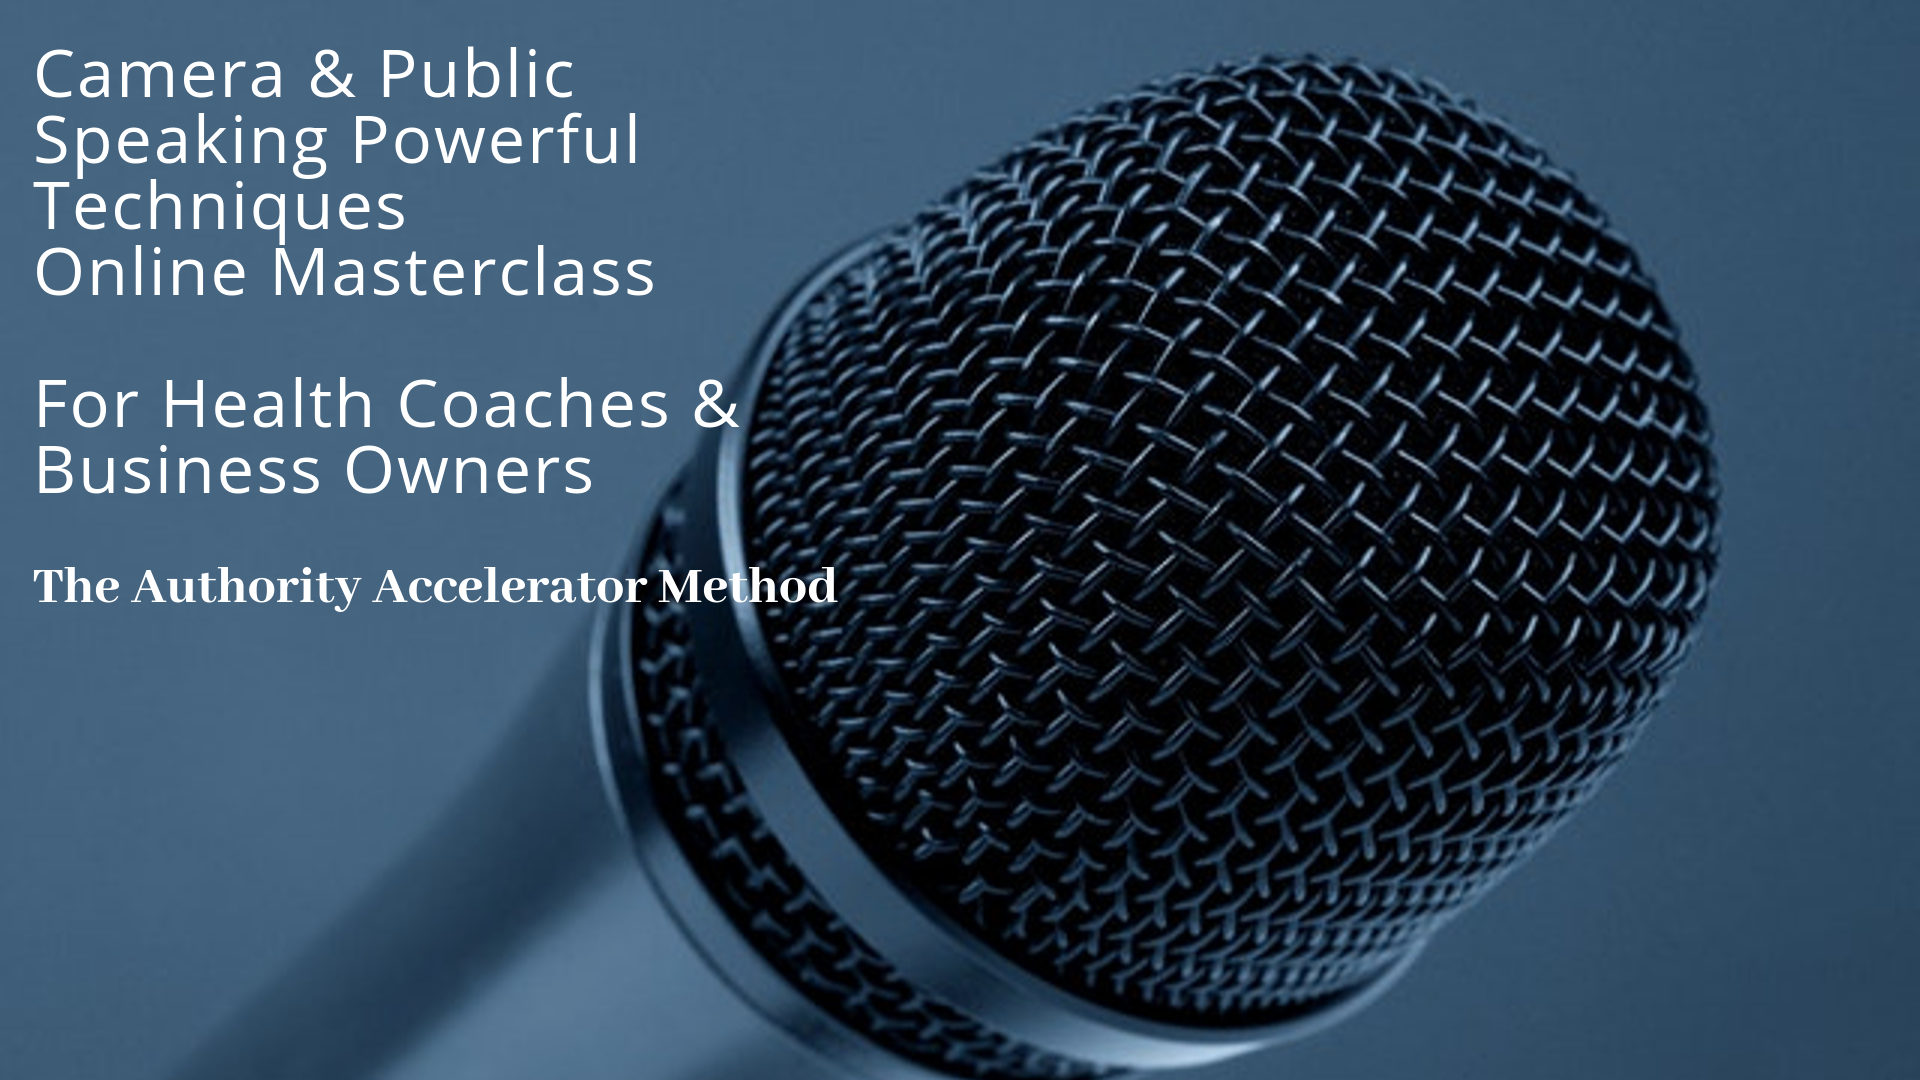 Camera and Public Speaking Powerful Techniques Online Masterclass Business